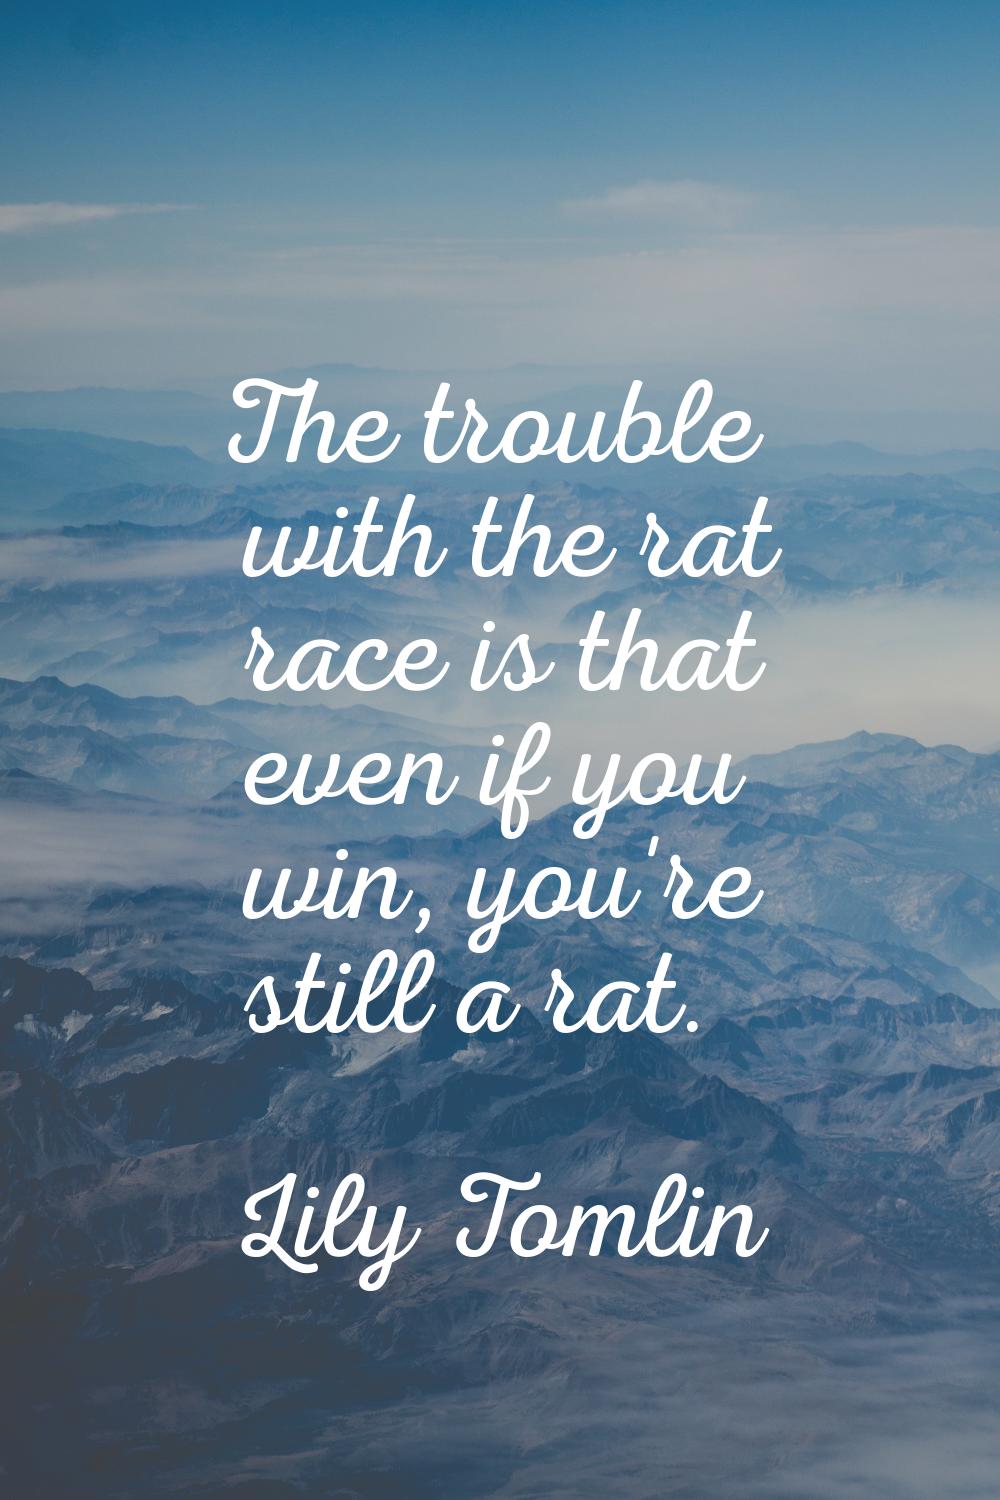 The trouble with the rat race is that even if you win, you're still a rat.